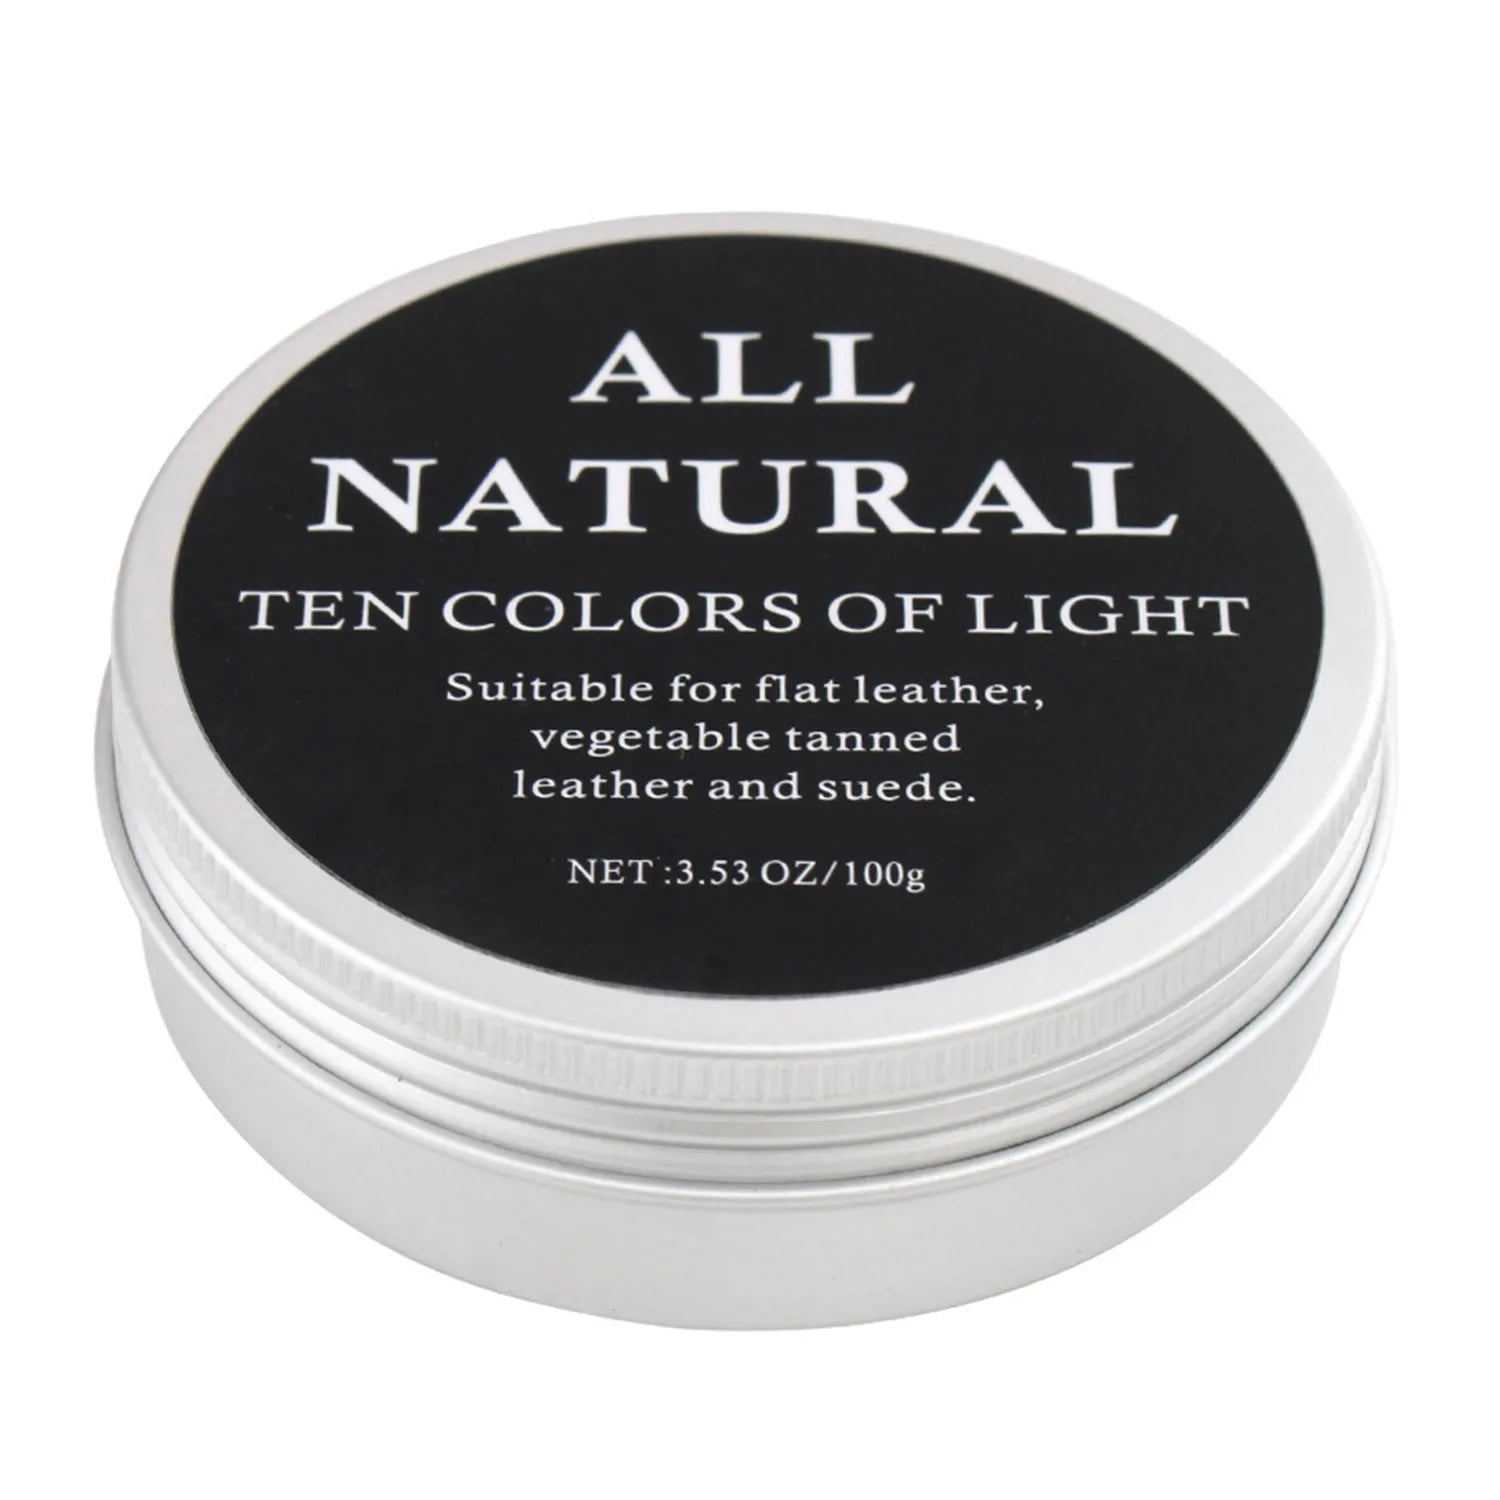 Genuine Leather Mink Oil Cream for Leather Care and Maintenance, Leather Conditioner Nourishing Balm for Leather Clothing and Accessories, Premium Genuine Leather Mink Oil Cream for Handbags Shoes